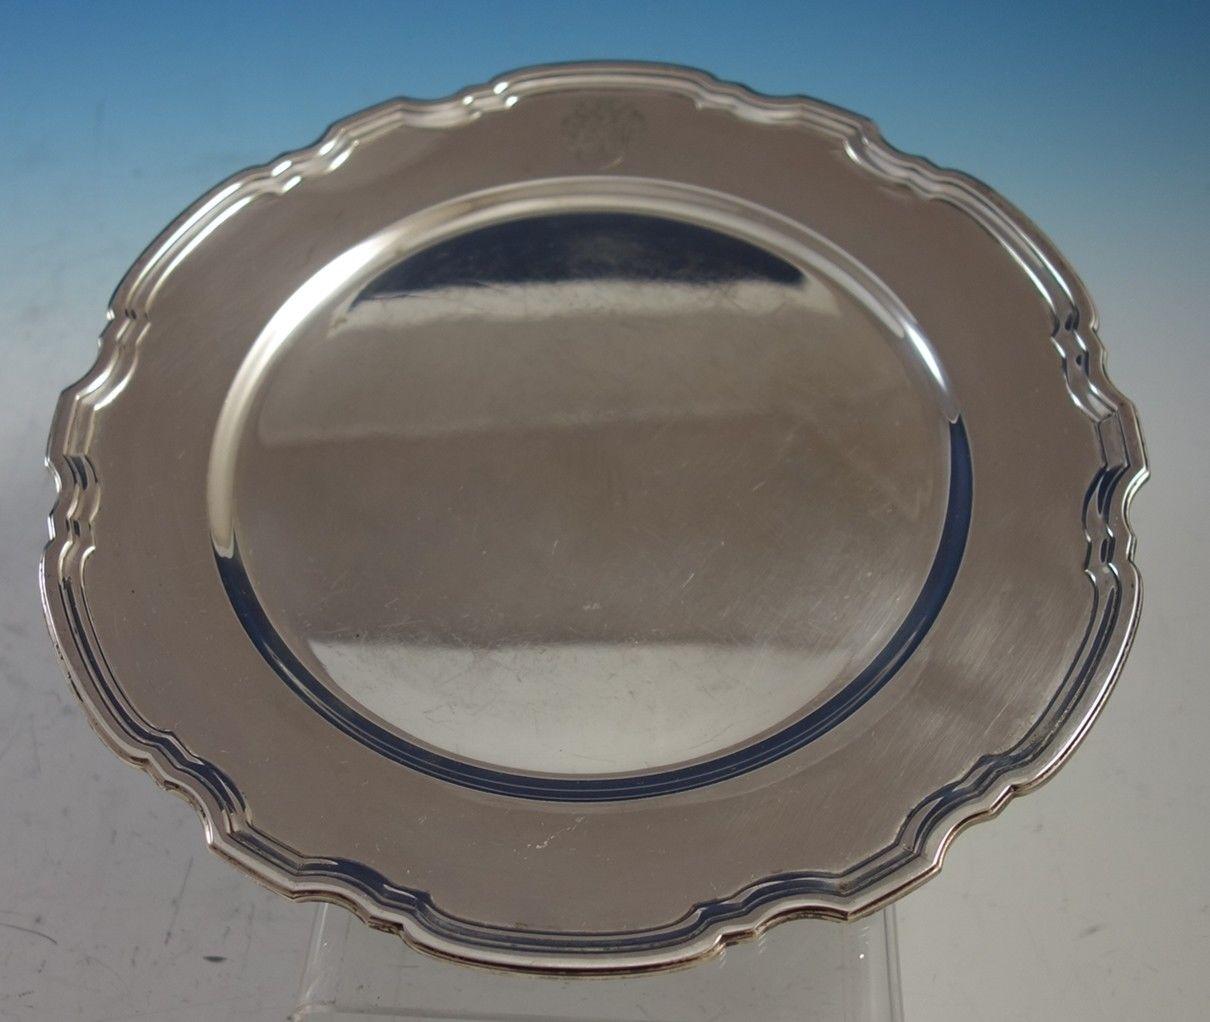 Beautiful Hampton by Tiffany & Co. sterling silver charger plate marked #20843. The plate measures 10 3/4 in diameter and weighs 19.34 troy ounces. It has a vintage engraved crest (see photos), which can be removed upon request. This charger plate